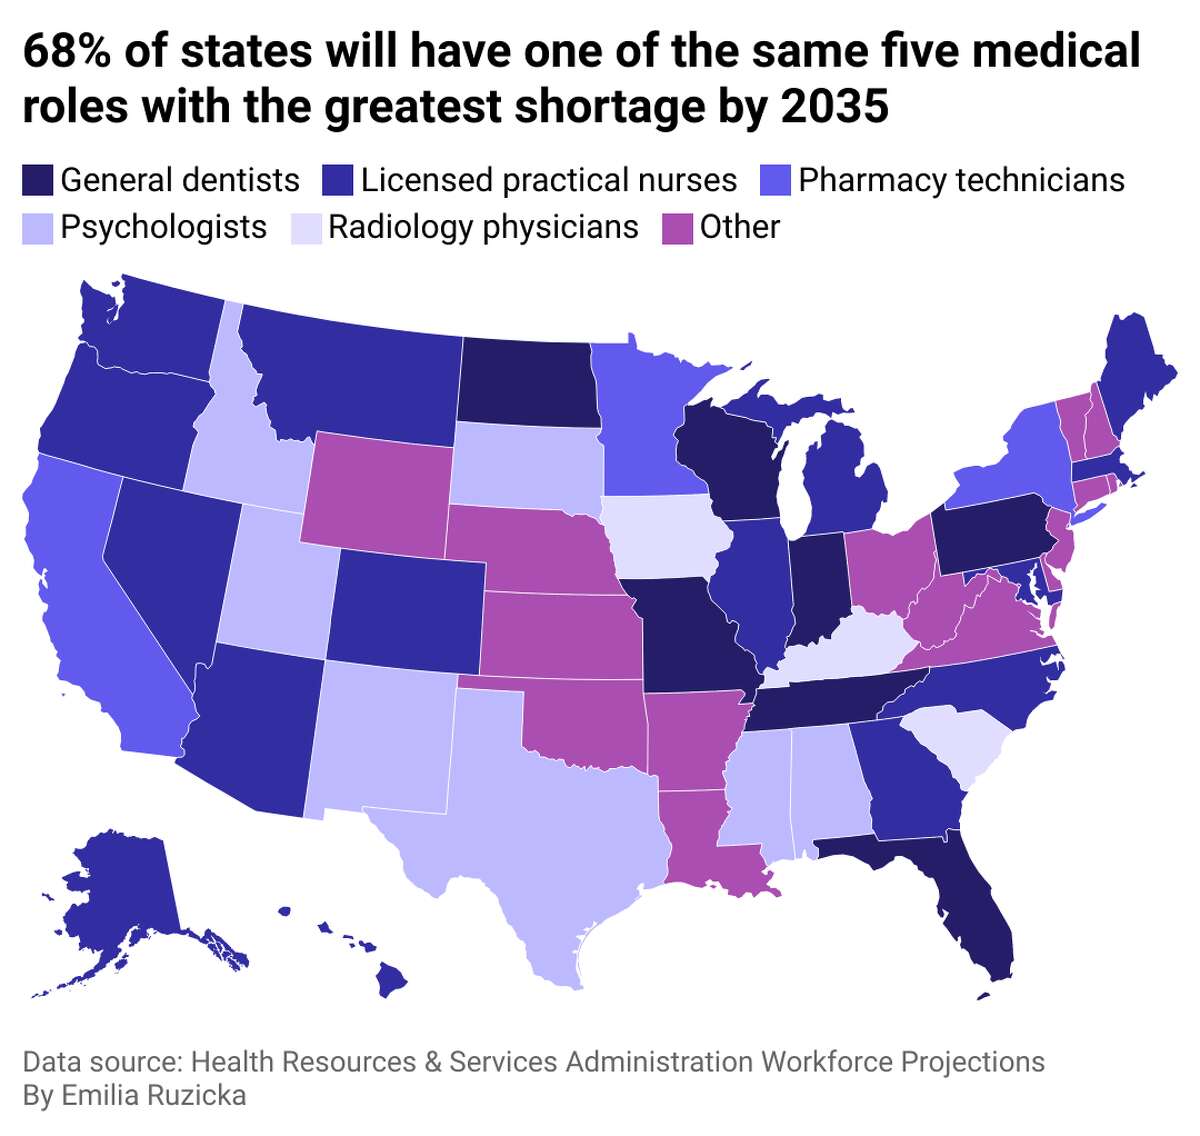 Roles in medicine projected to have the greatest shortages by 2035